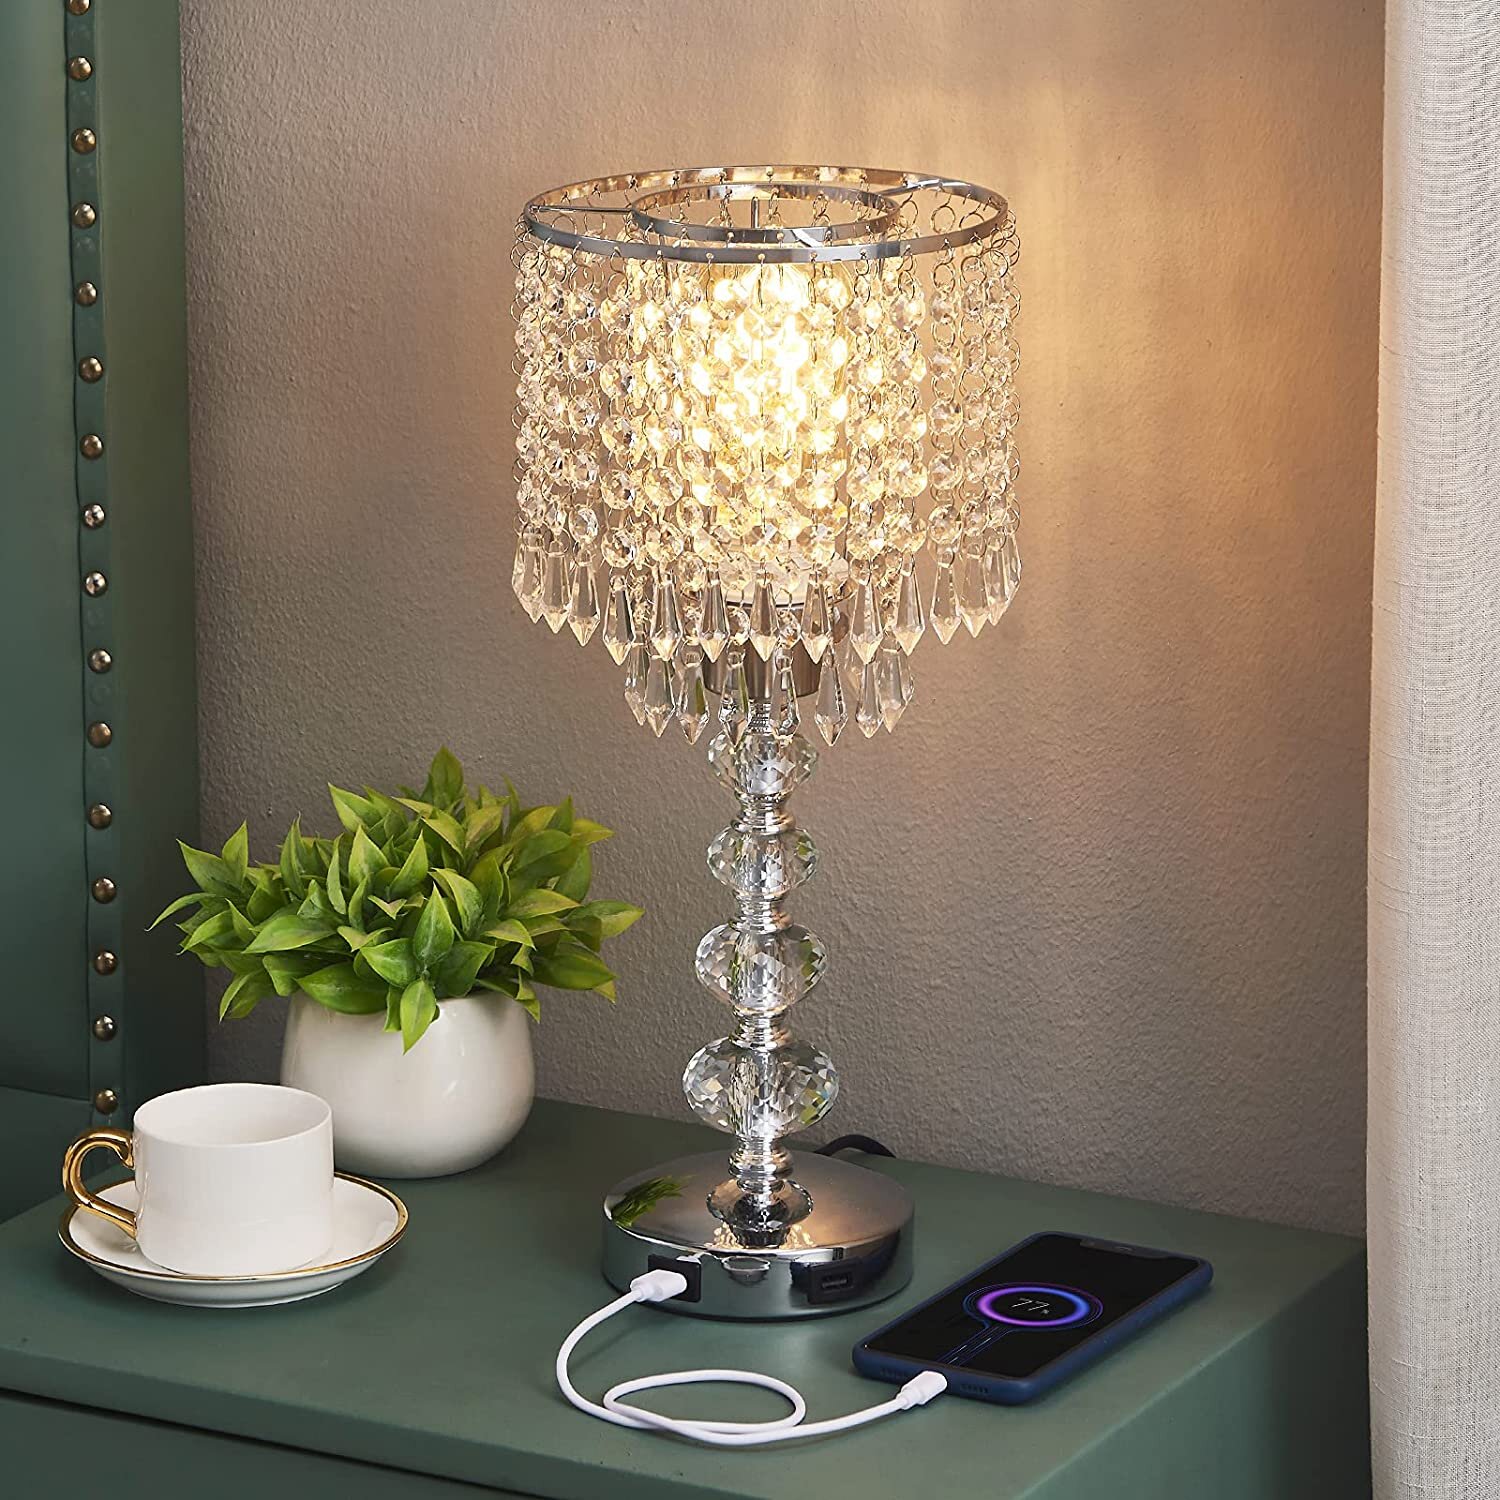 Nightstand Decorative Room Table Lamp Kakanuo Modern Bedside Table Lamp Sliver Lamp Shade Night Light Fixture for Living Room/Bedroom/Kitchen/Dining Room Crystal Table Desk Lamp 